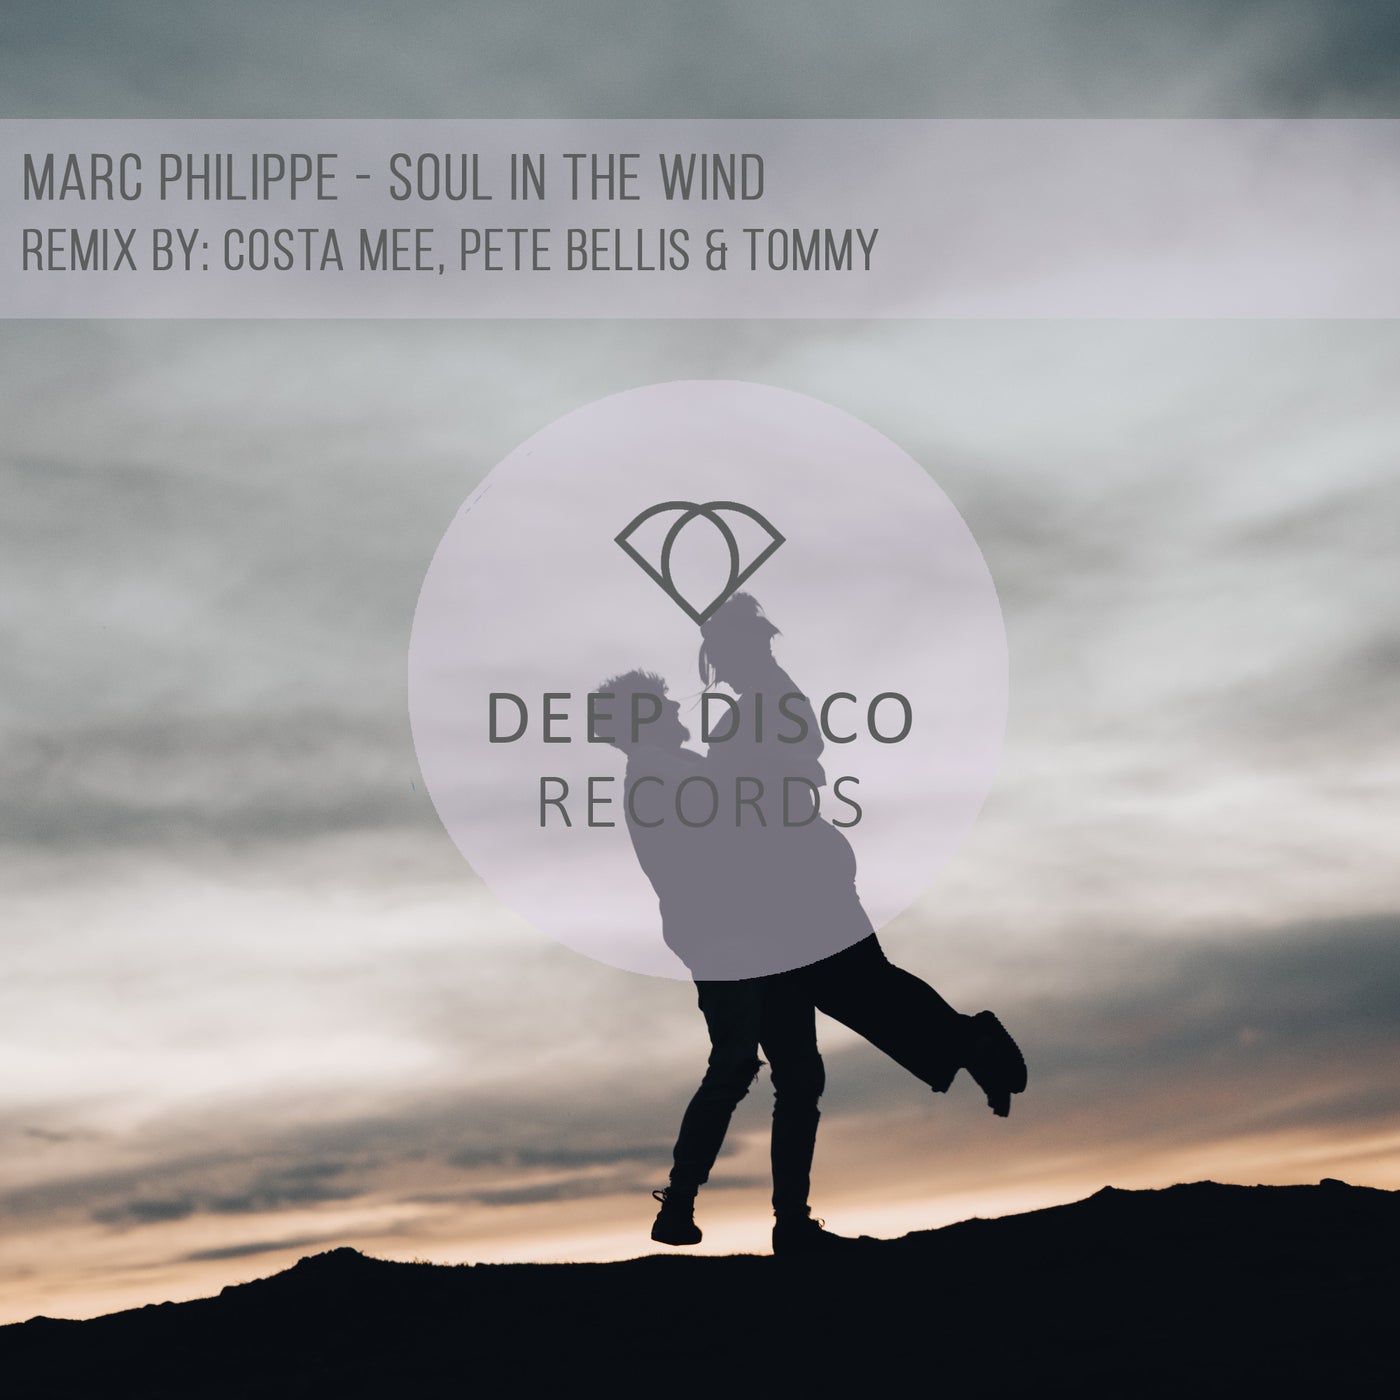 Marc philippe costa mee. Marc Philippe - Soul in the Wind. Costa mee & Pete Bellis & Tommy. Marc Philippe Dancer in the Dark. Costa mee 2021.